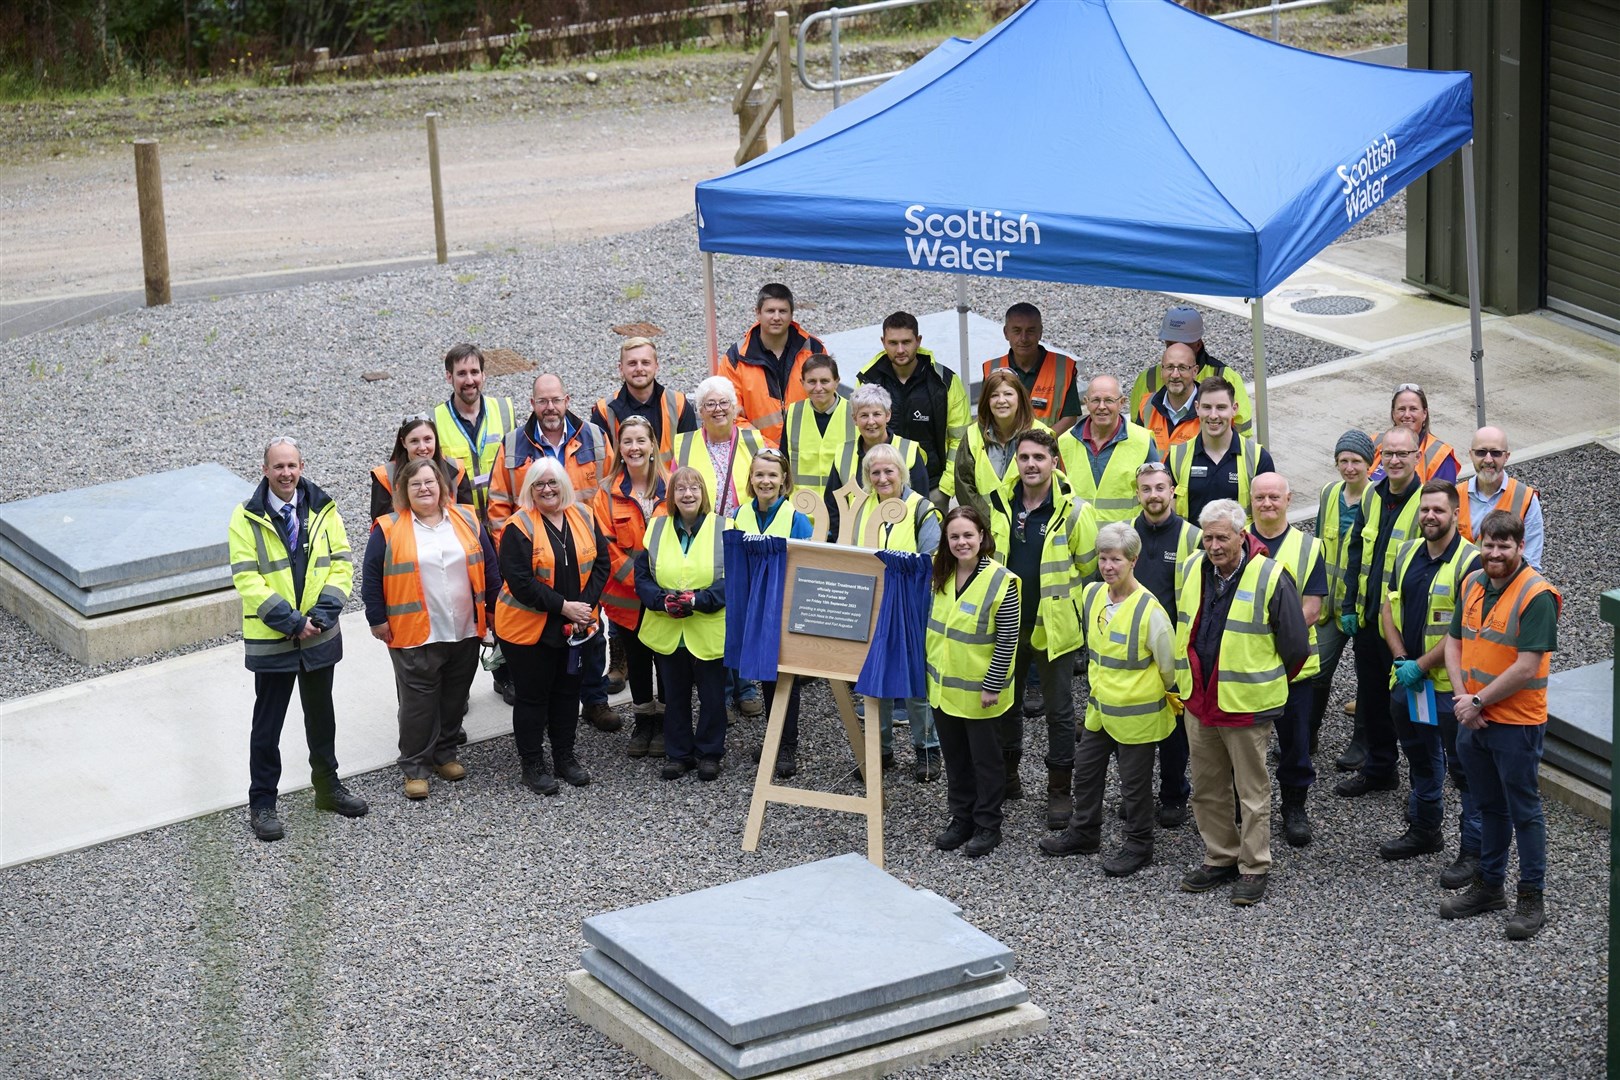 Kate Forbes with local community members and Scottish water representatives on the opening day.